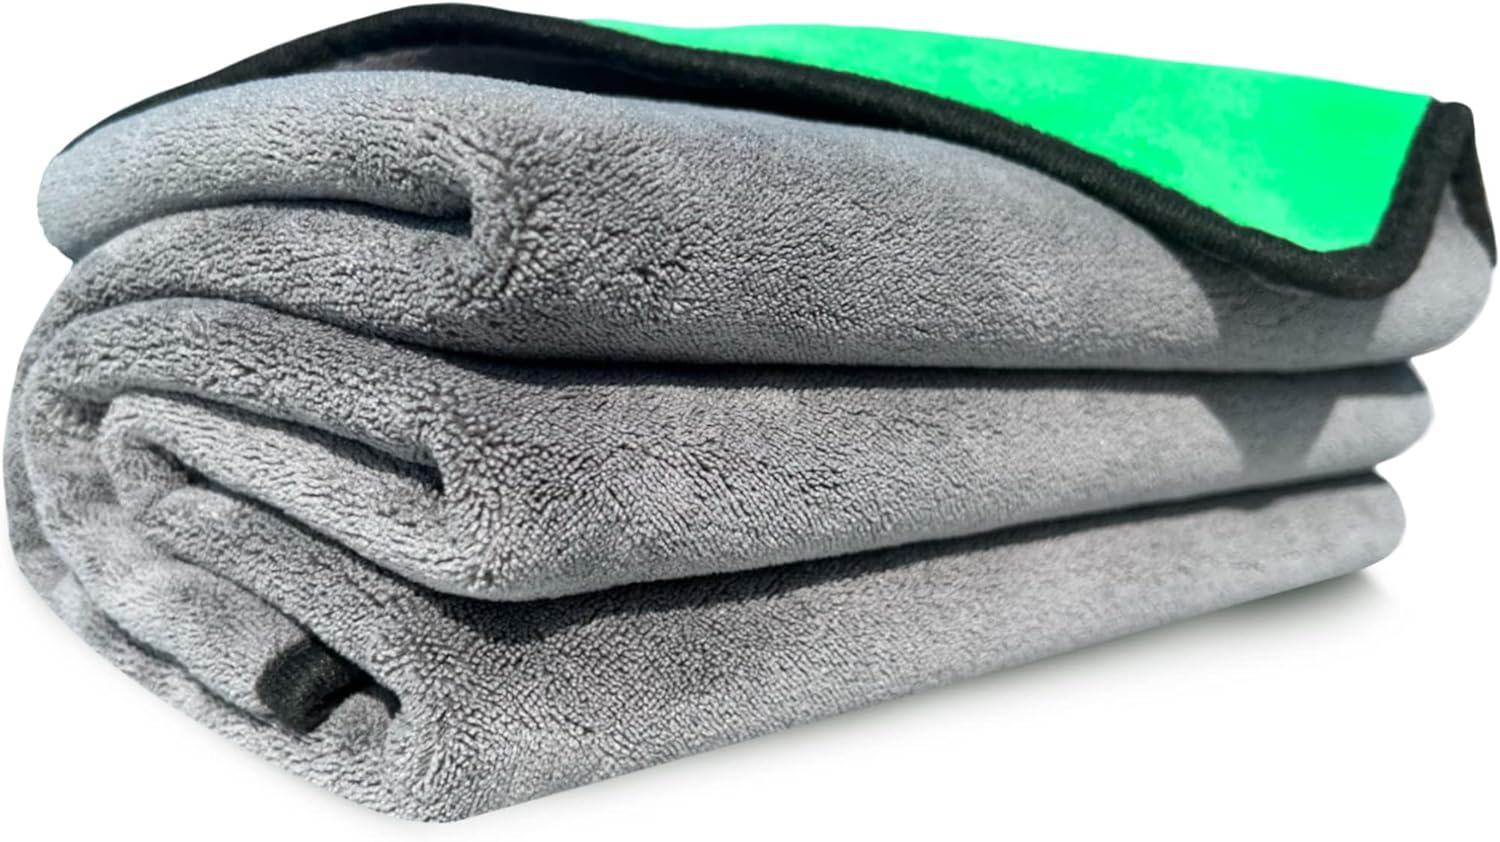 WEST BROS Microfiber Car Drying Towel Extra Large - Automotive Towel for  Cars Trucks and SUV - XL Professional Water Absorber Towels Auto